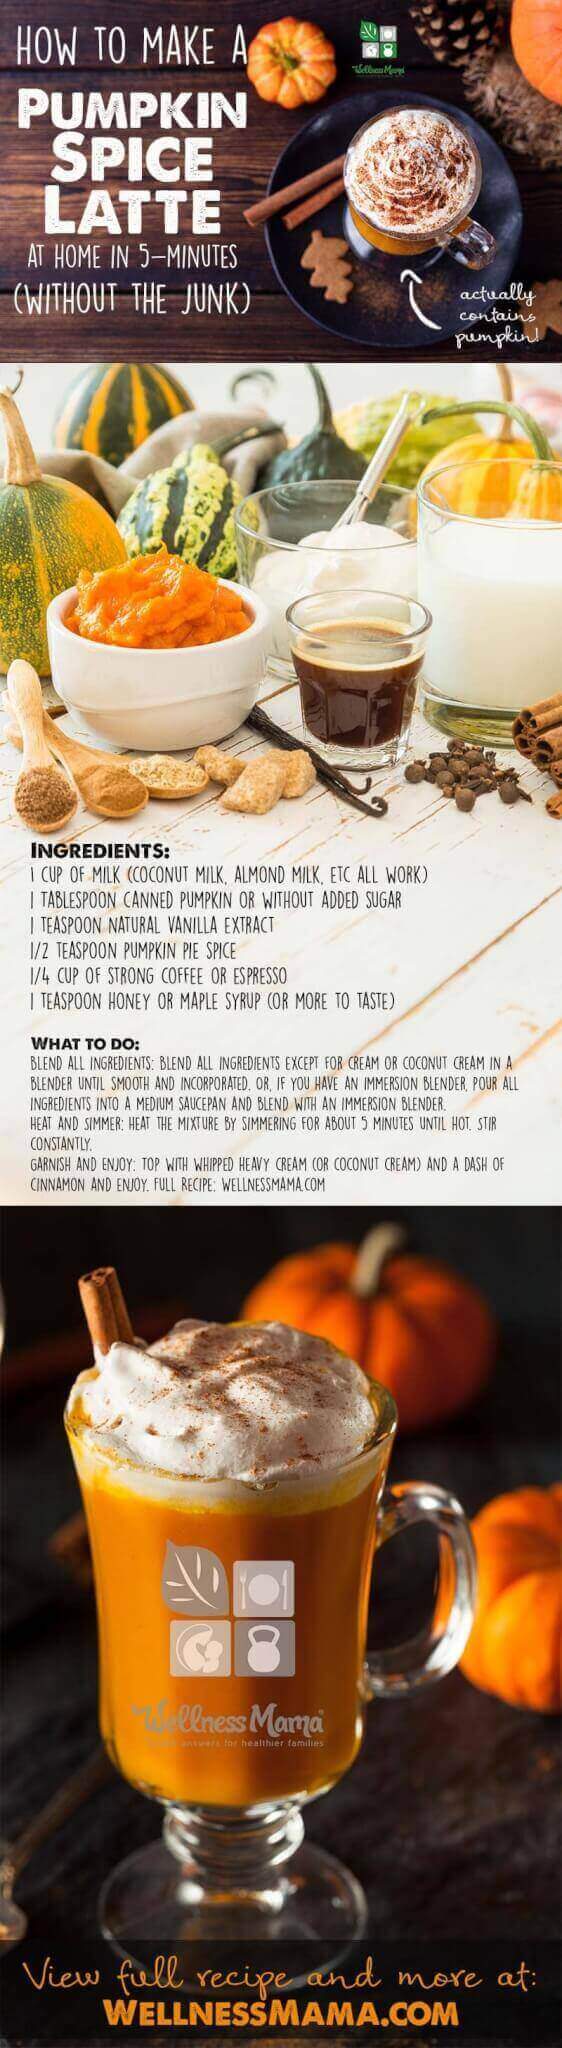 how-to-make-a-pumpkin-spice-latte-at-home-infographic